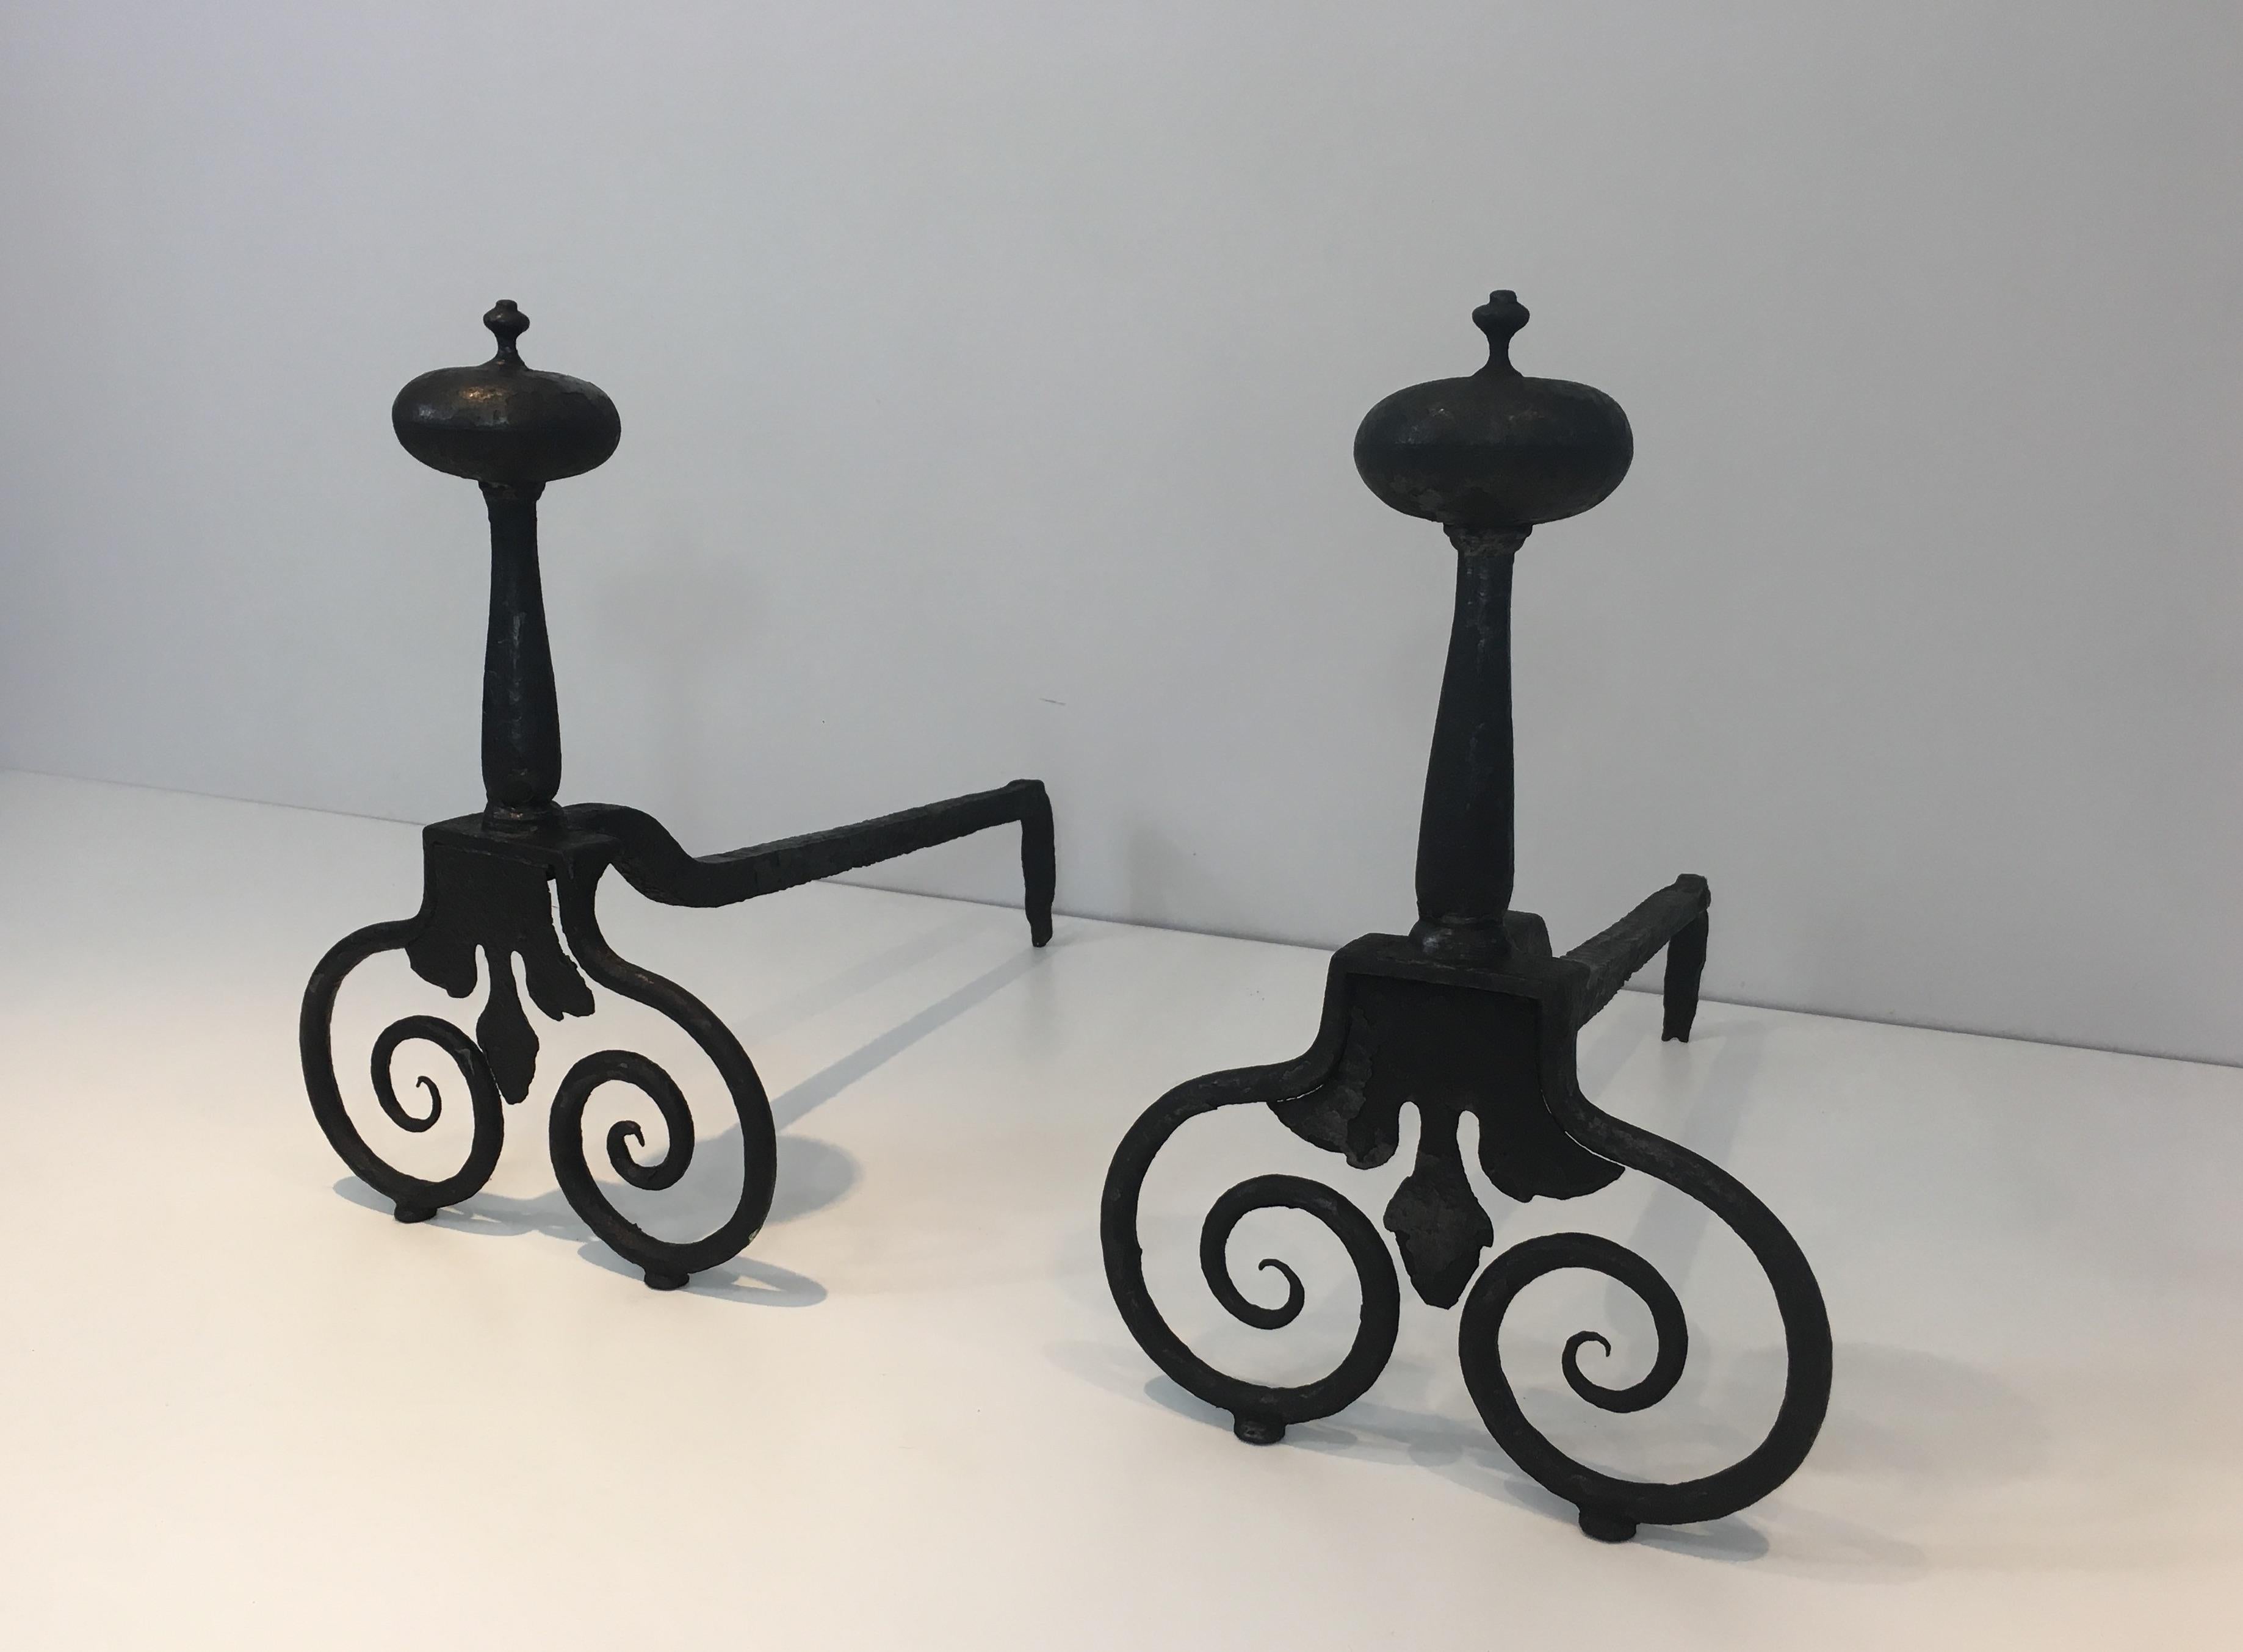 Pair of Wrought Iron Andirons, French, 18th Century.